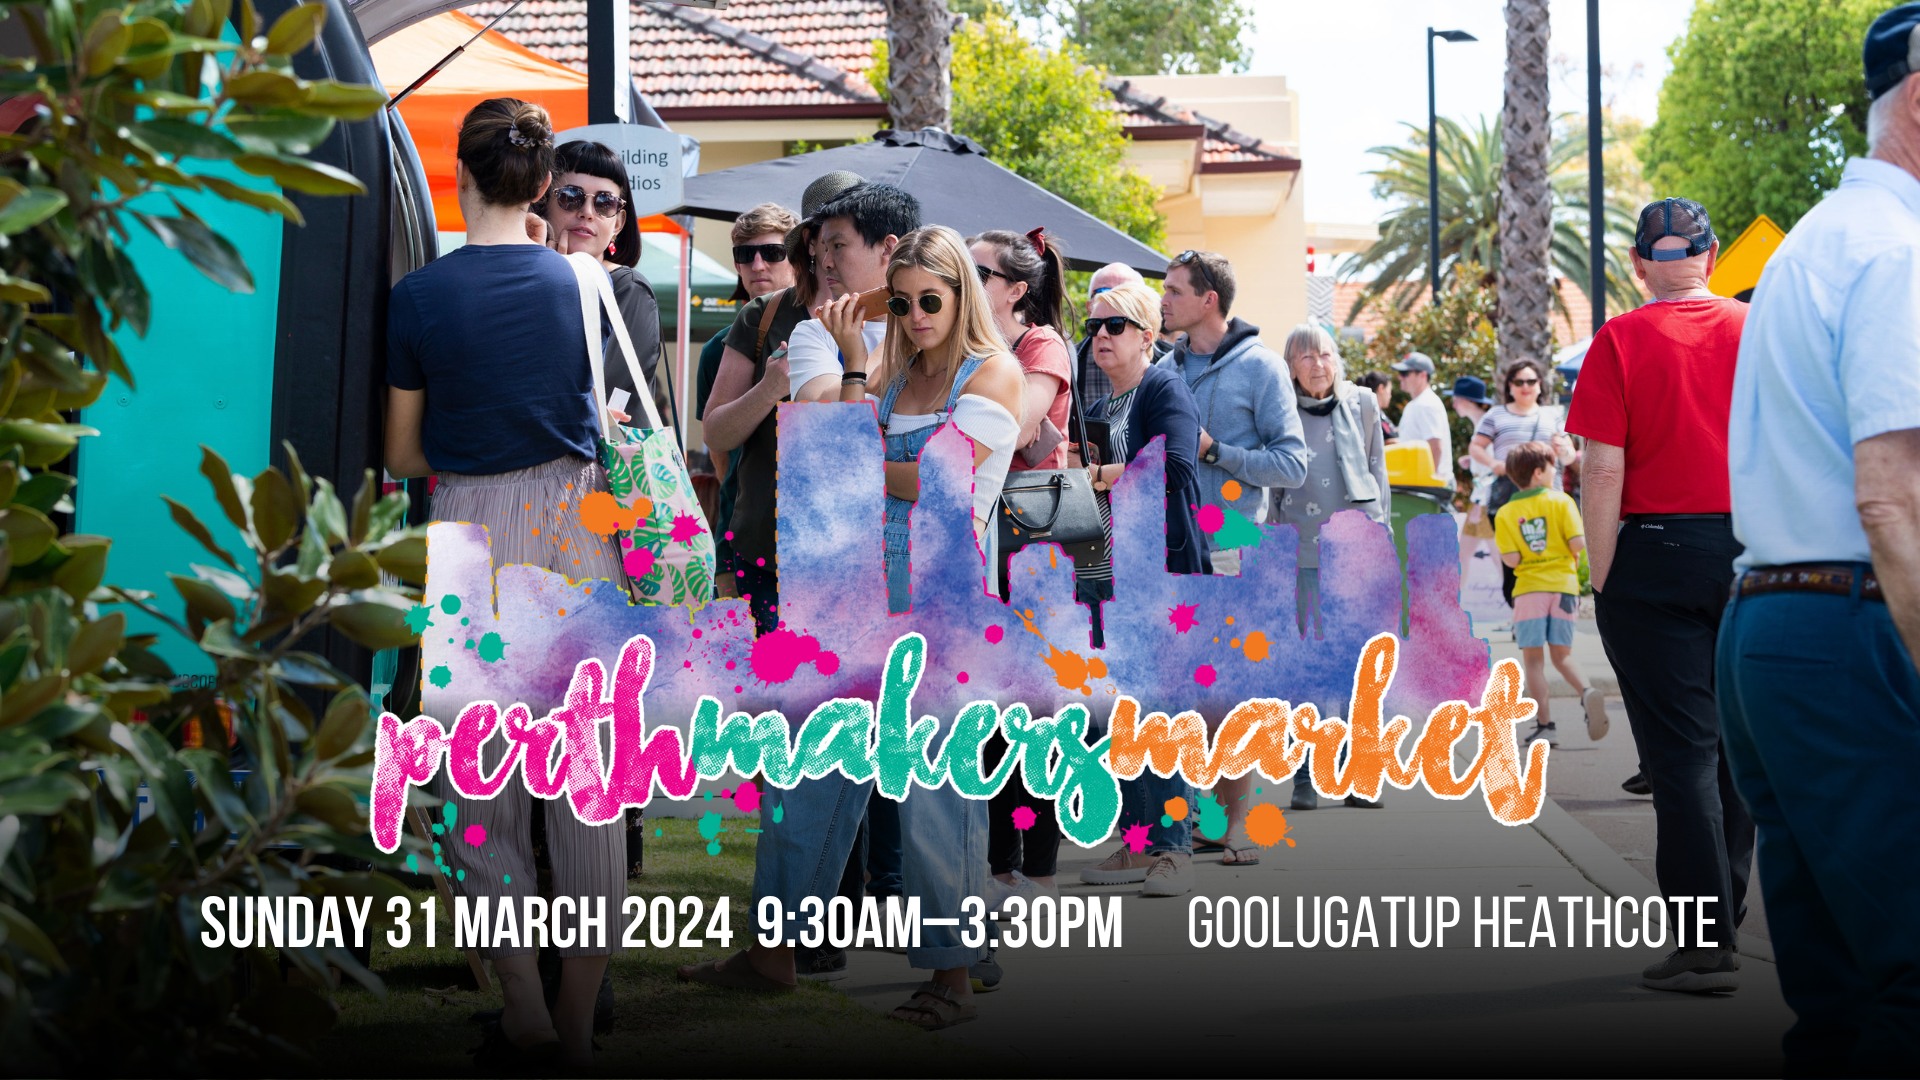 Perth Makers Market Easter 2024,March 11, 2024 Seniors / Over 55's